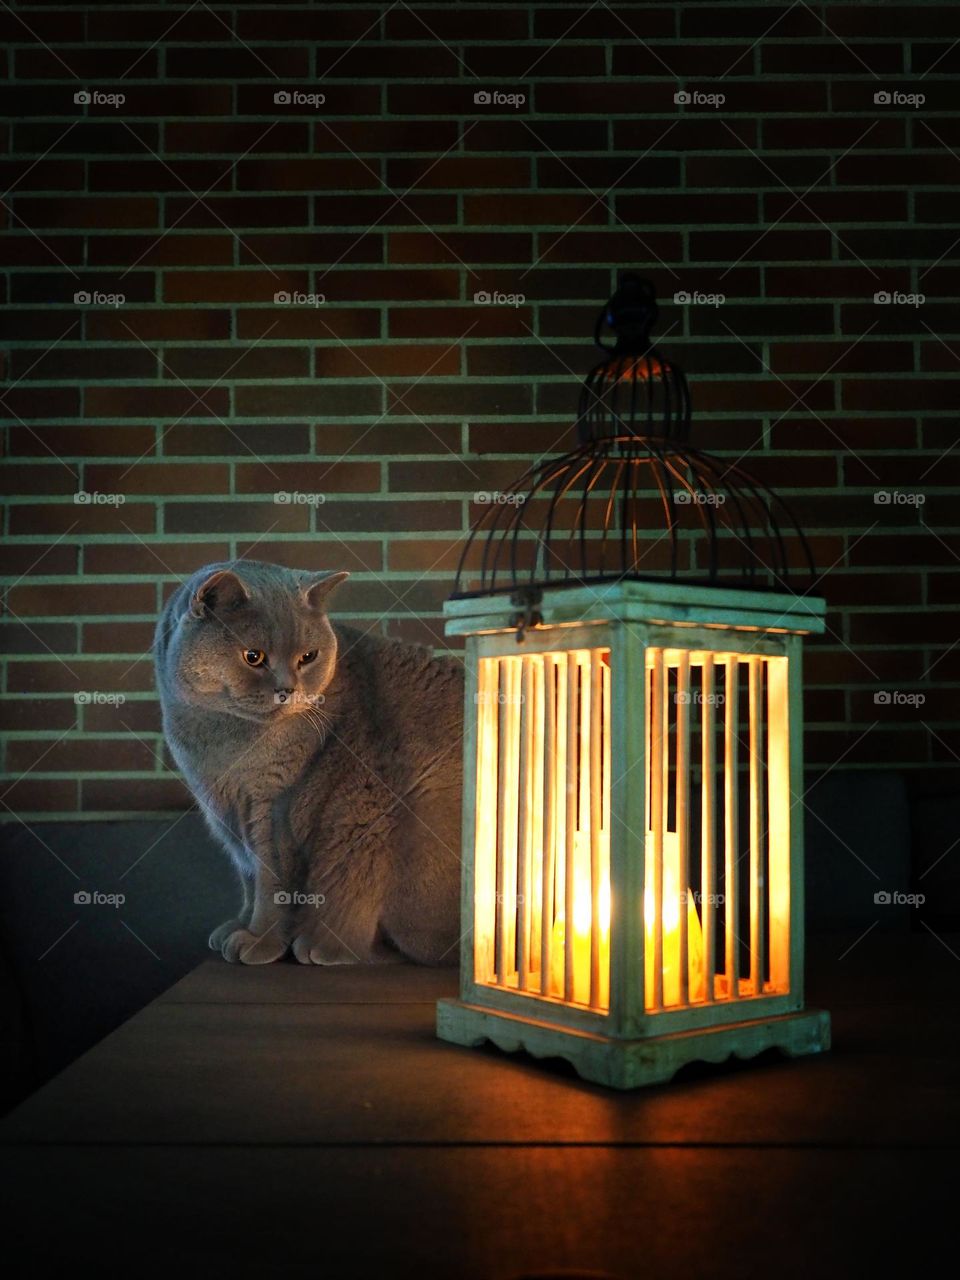 Night lights: the candle and the cat